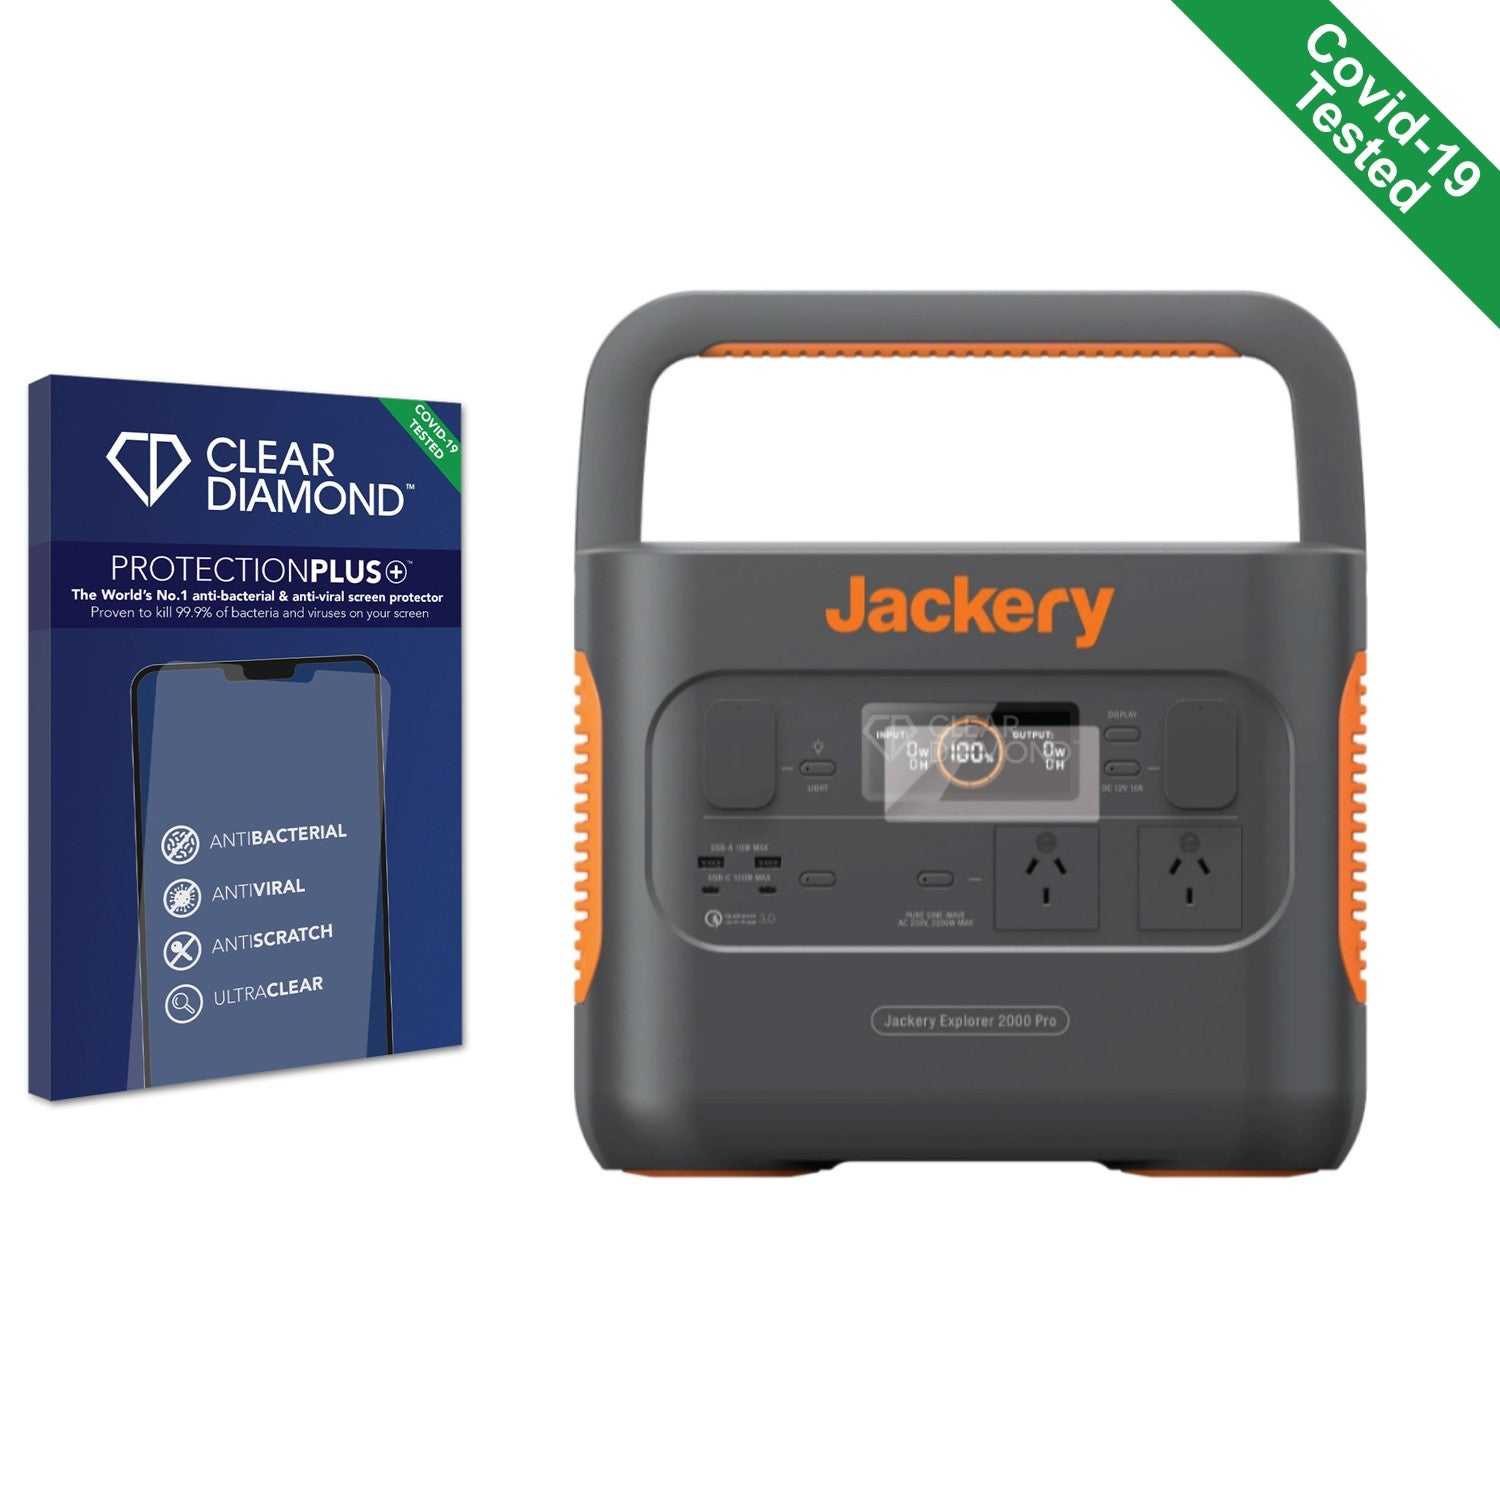 ScreenShield, Clear Diamond Anti-viral Screen Protector for Jackery Explorer 2000 Pro Portable Power Station